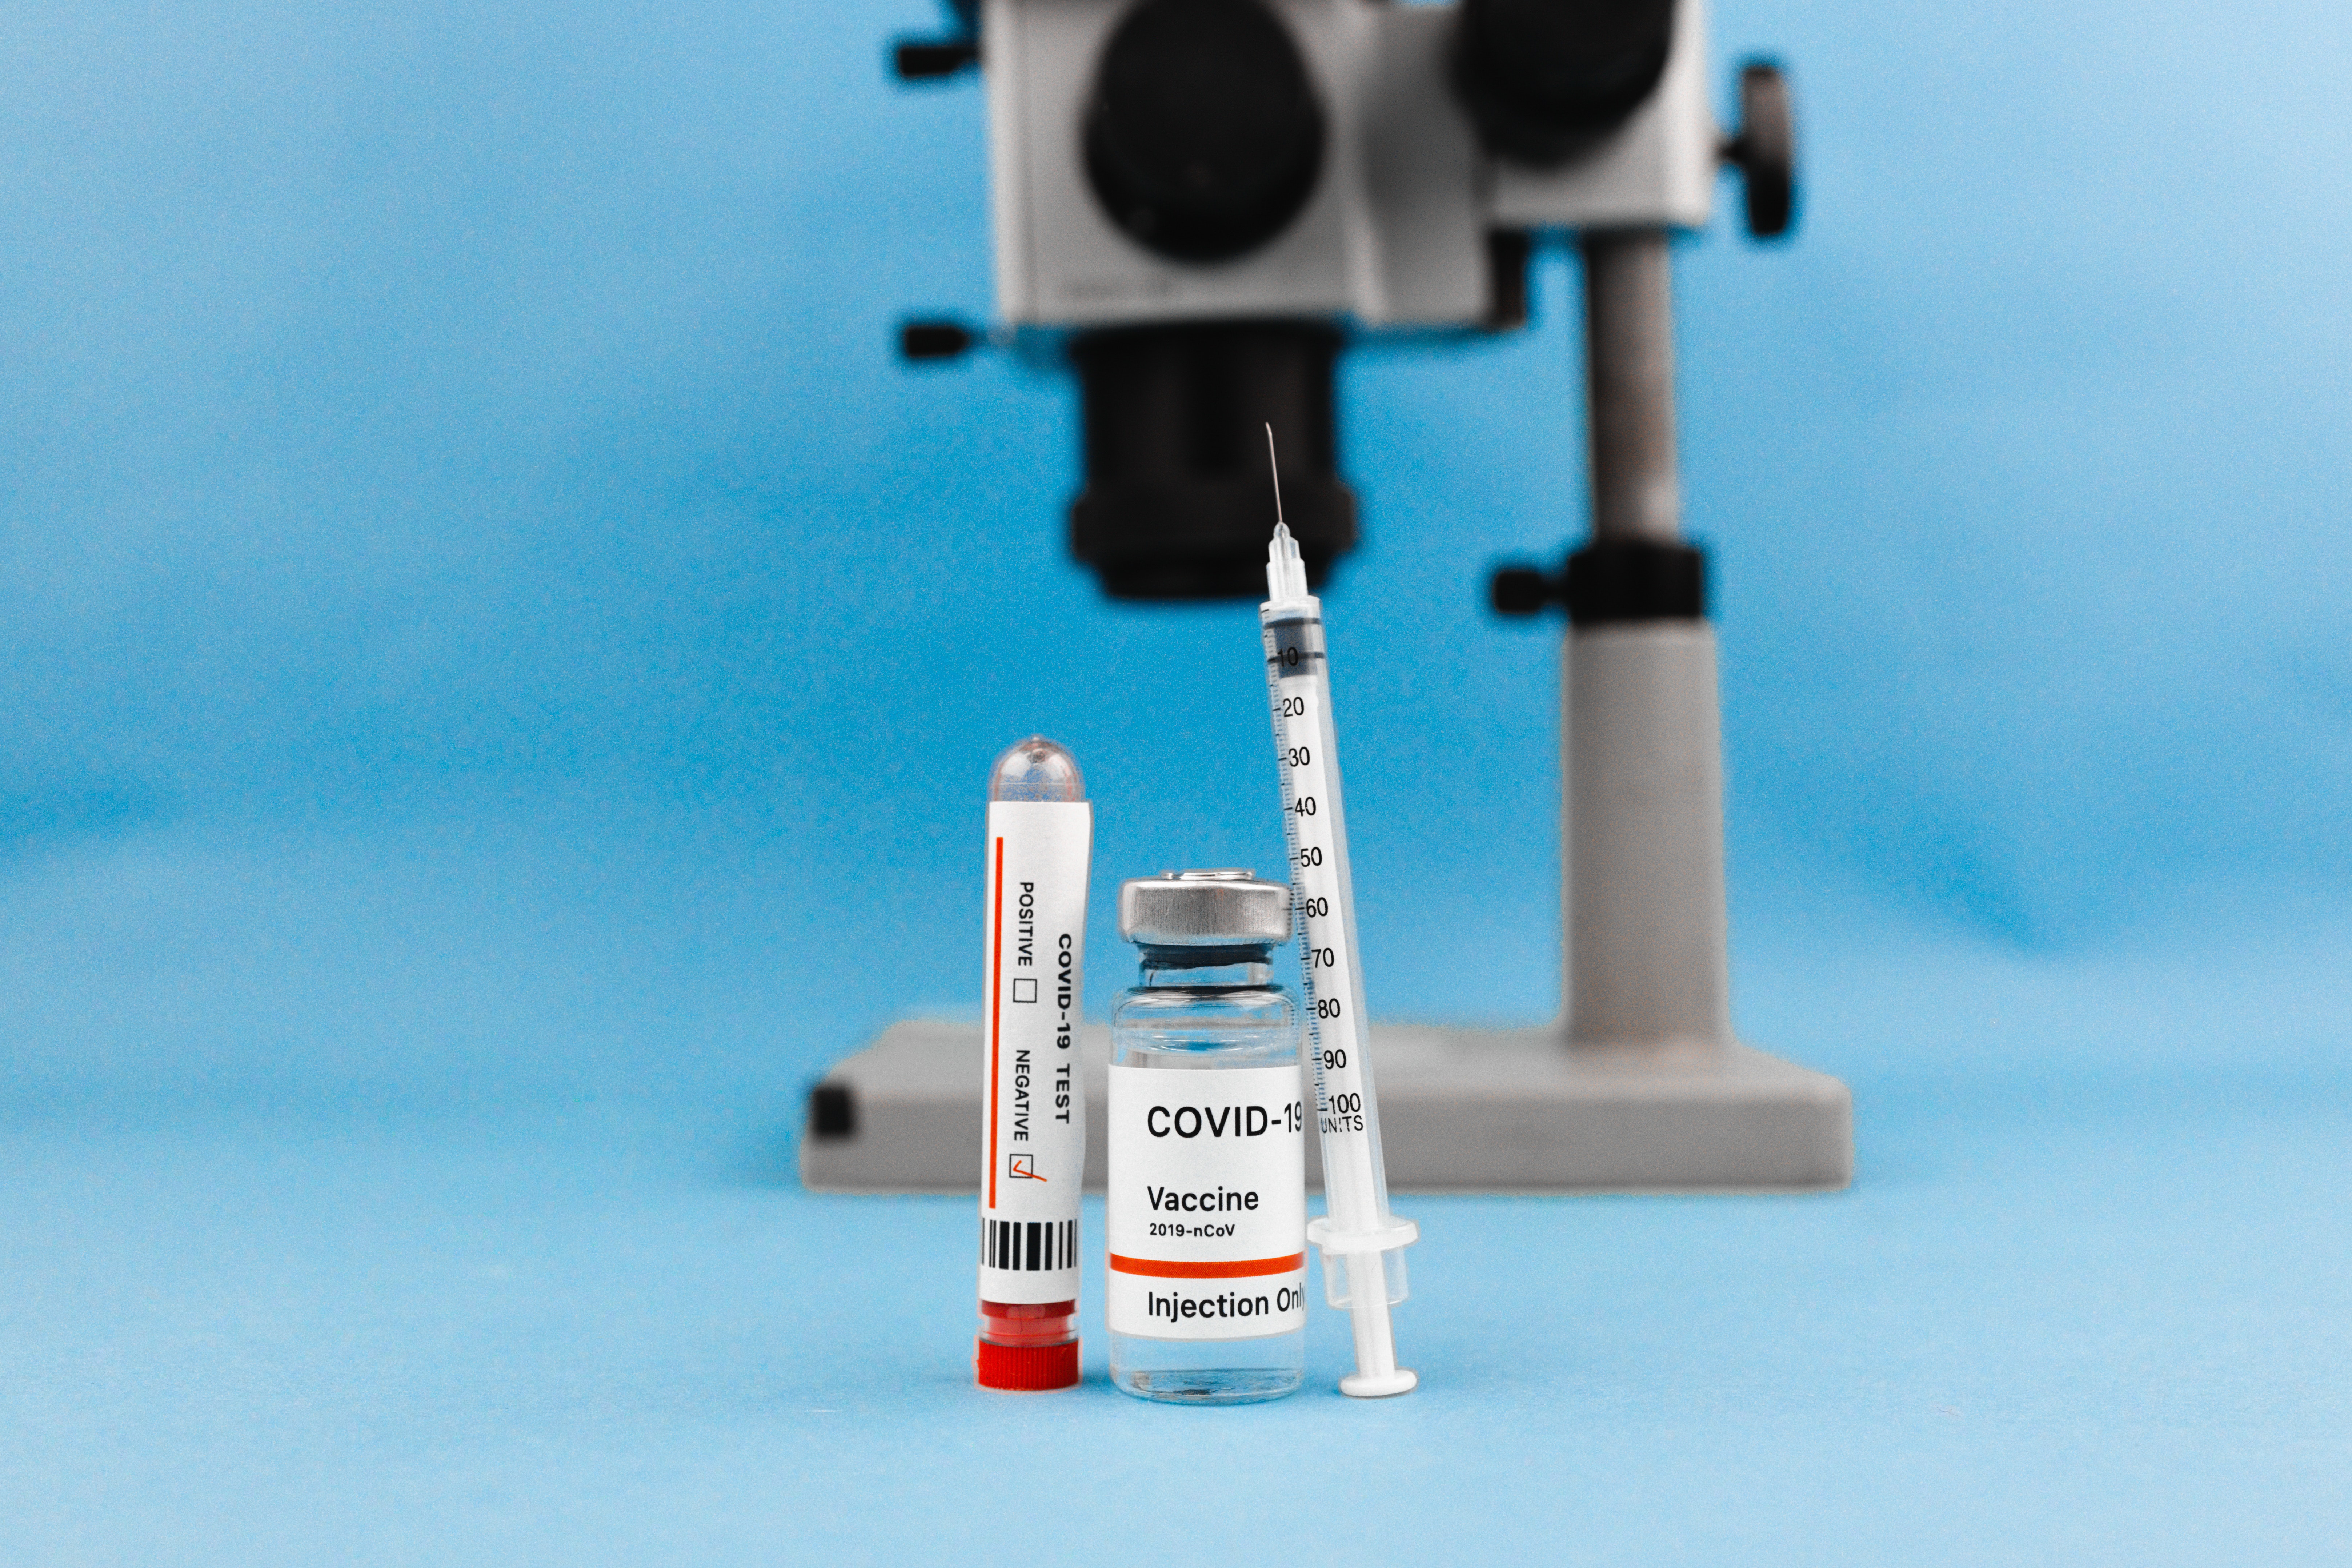 Microscope, vaccine vial and syringe for clinical research and clinical trials. Biomedical research equipment